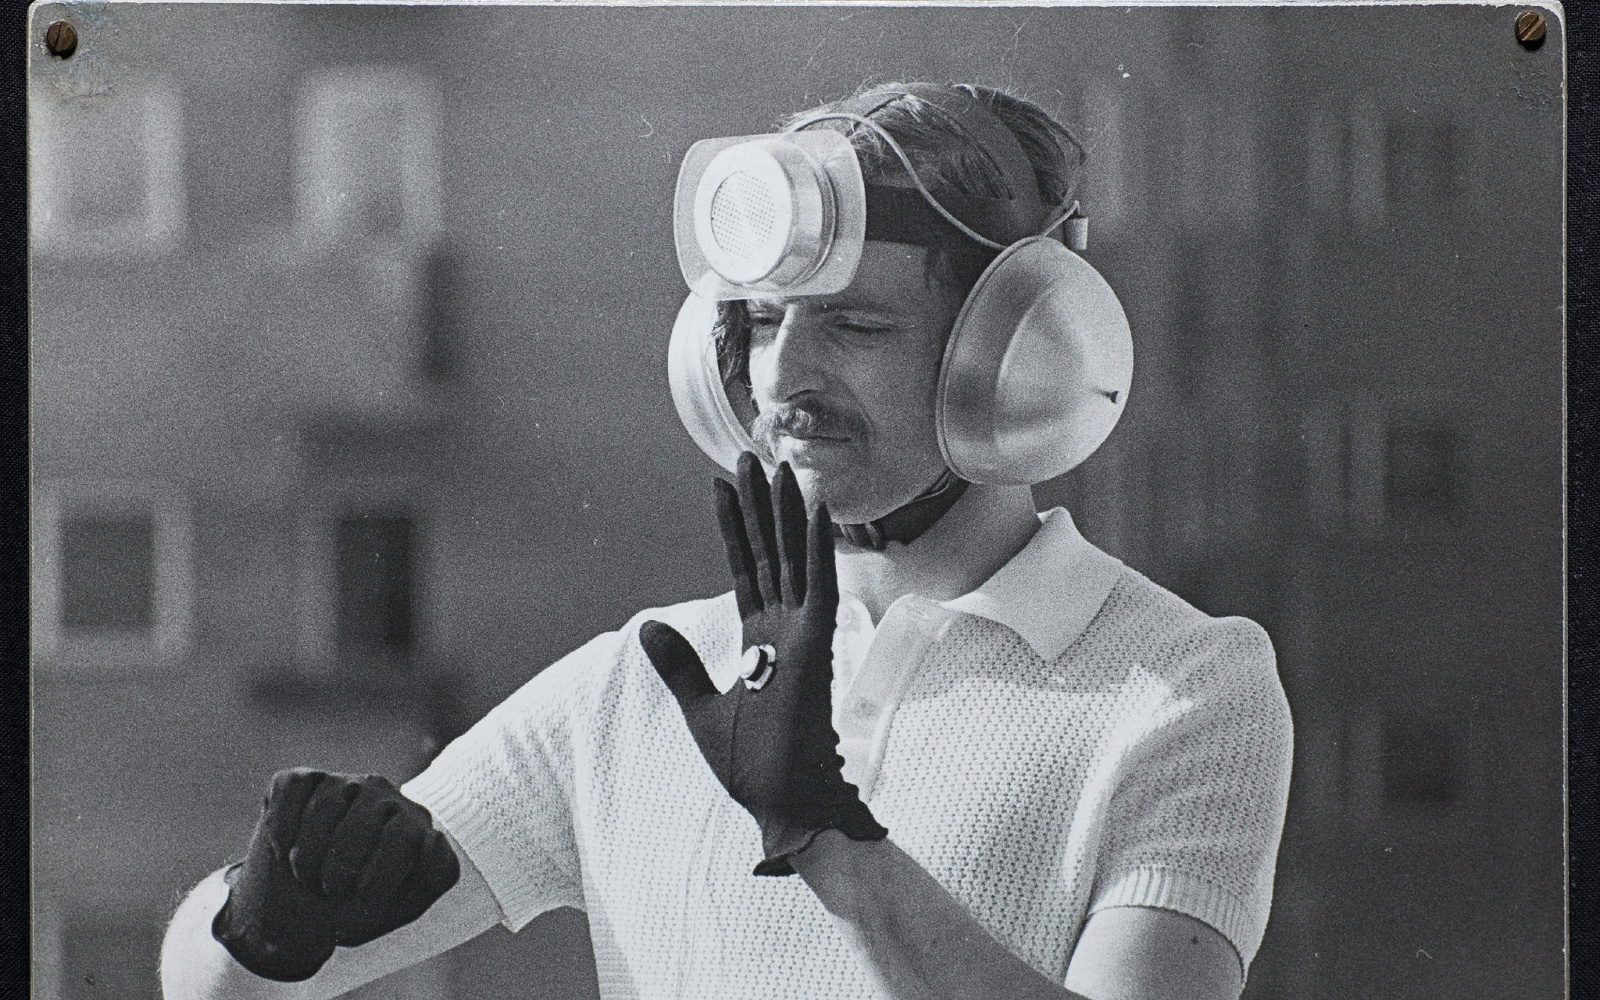 The black and white photo shows a man with a technical installation on his head, his ears covered with sound barriers.